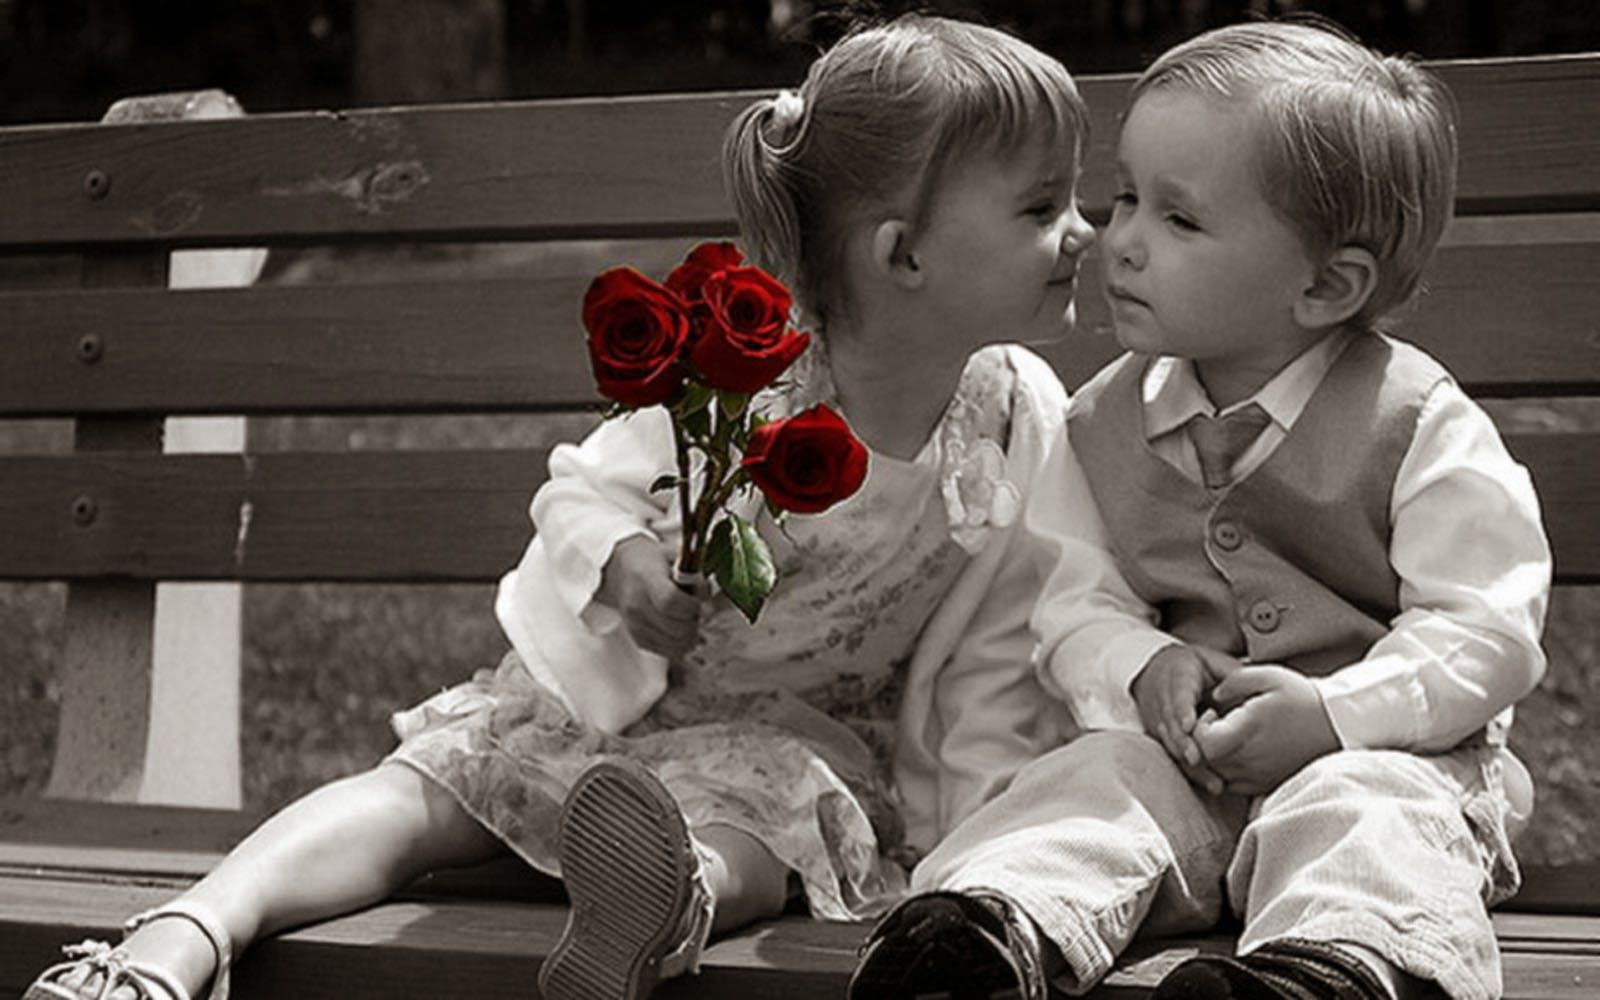 Romantic Moments Children With Making Out and Kissing Photo. free download wallpaper